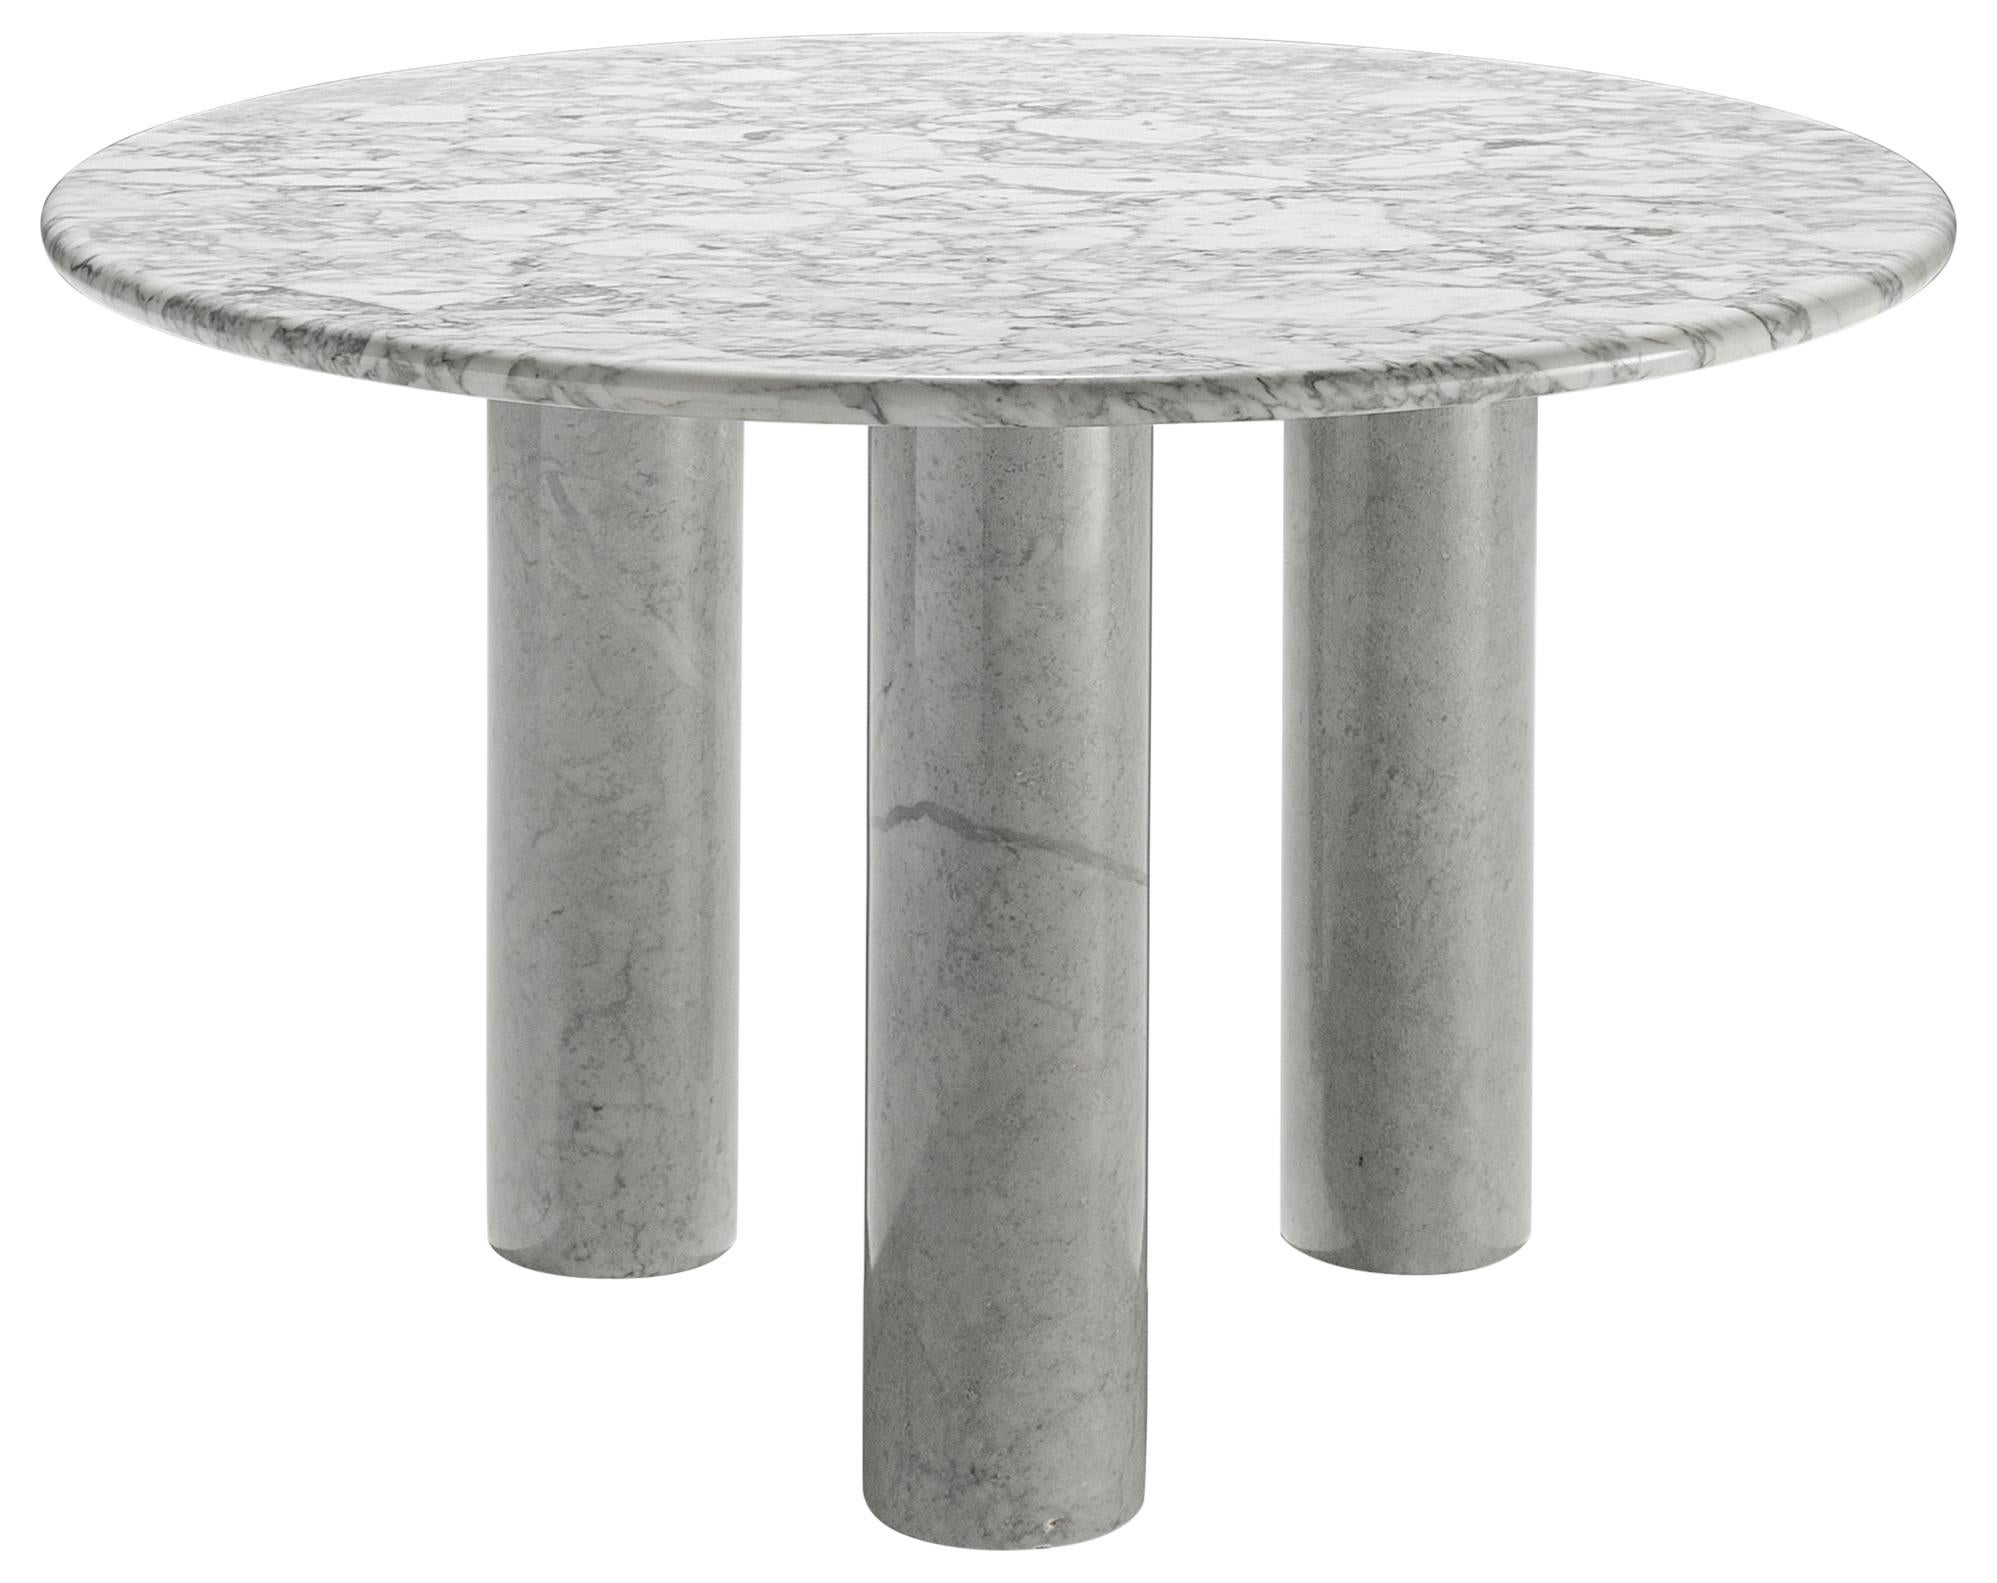 Round Italian Dining Table in White Marble